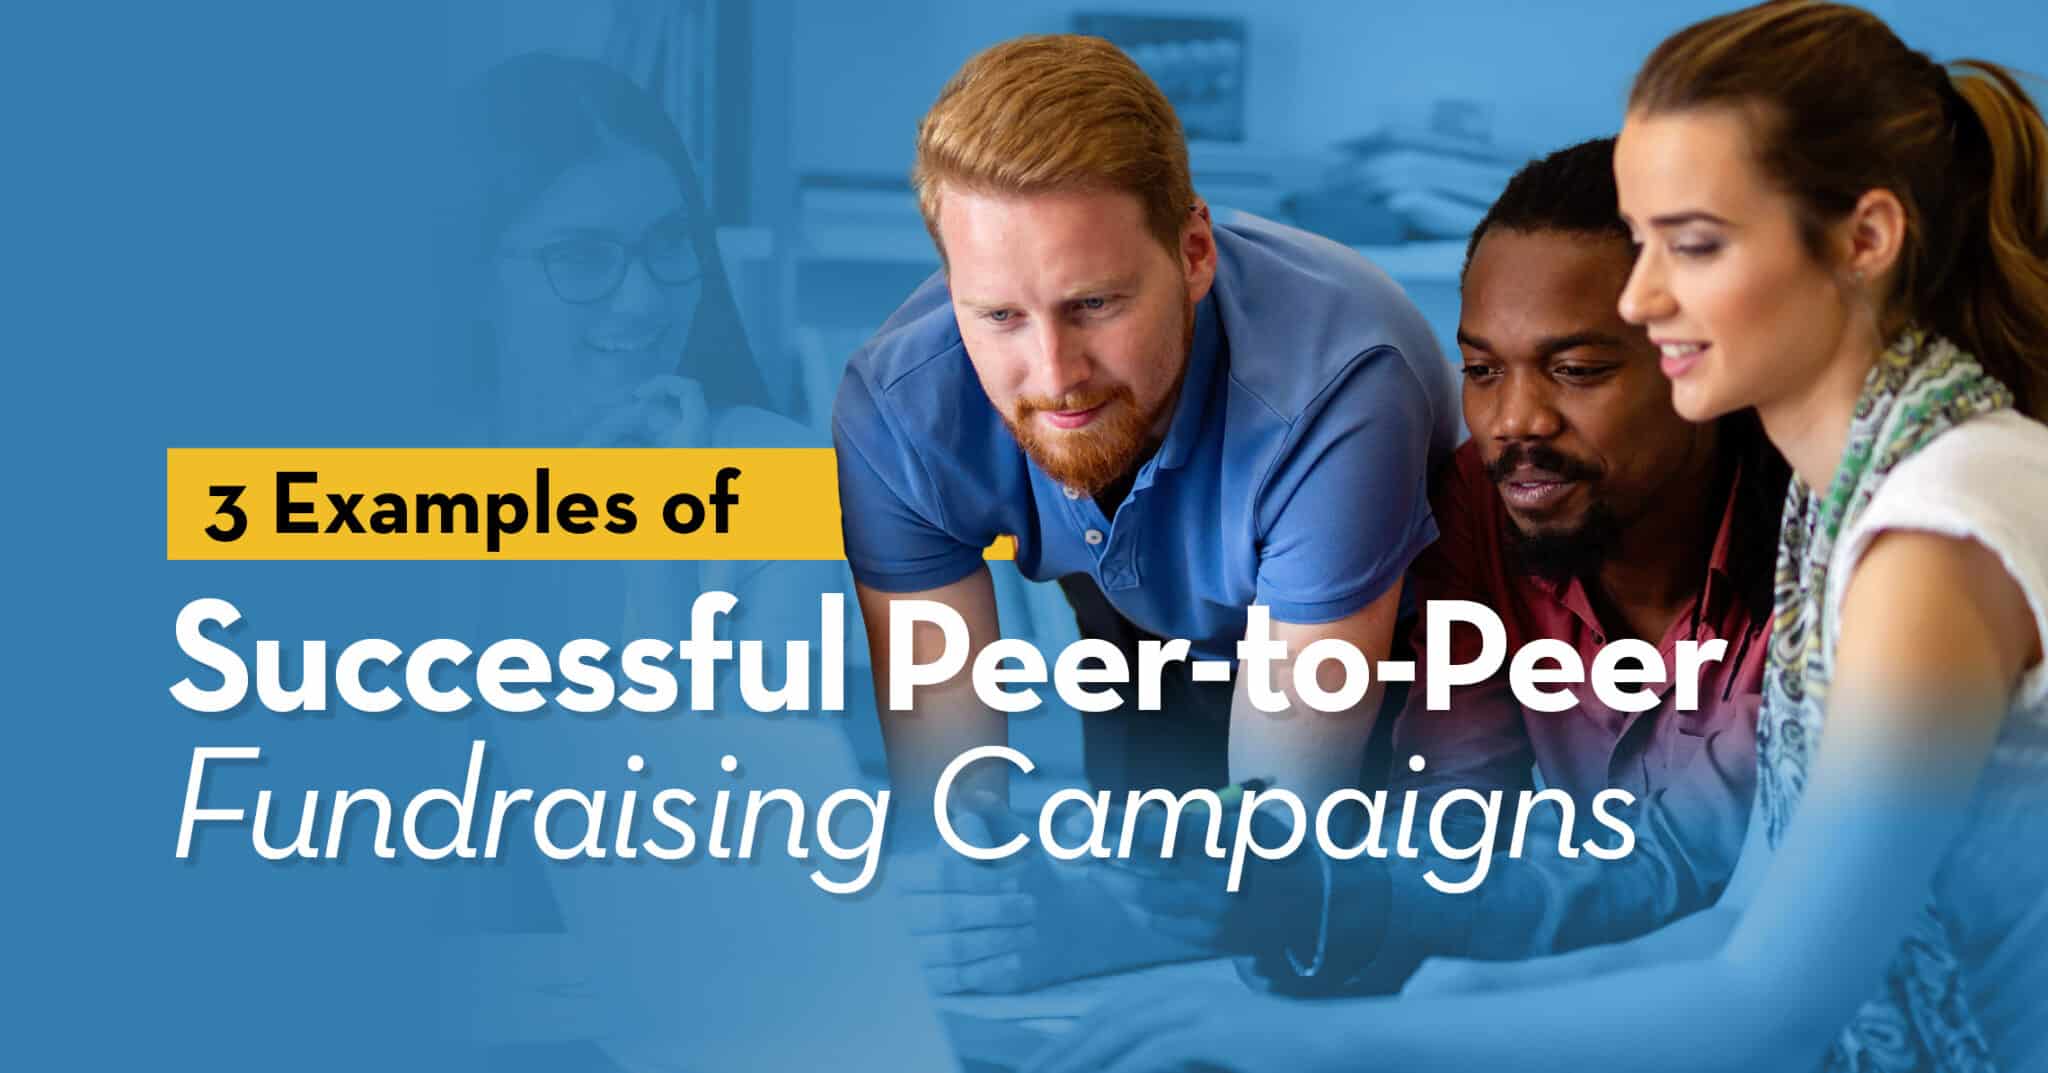 3 Examples of Successful Peer-to-Peer Fundraising Campaigns